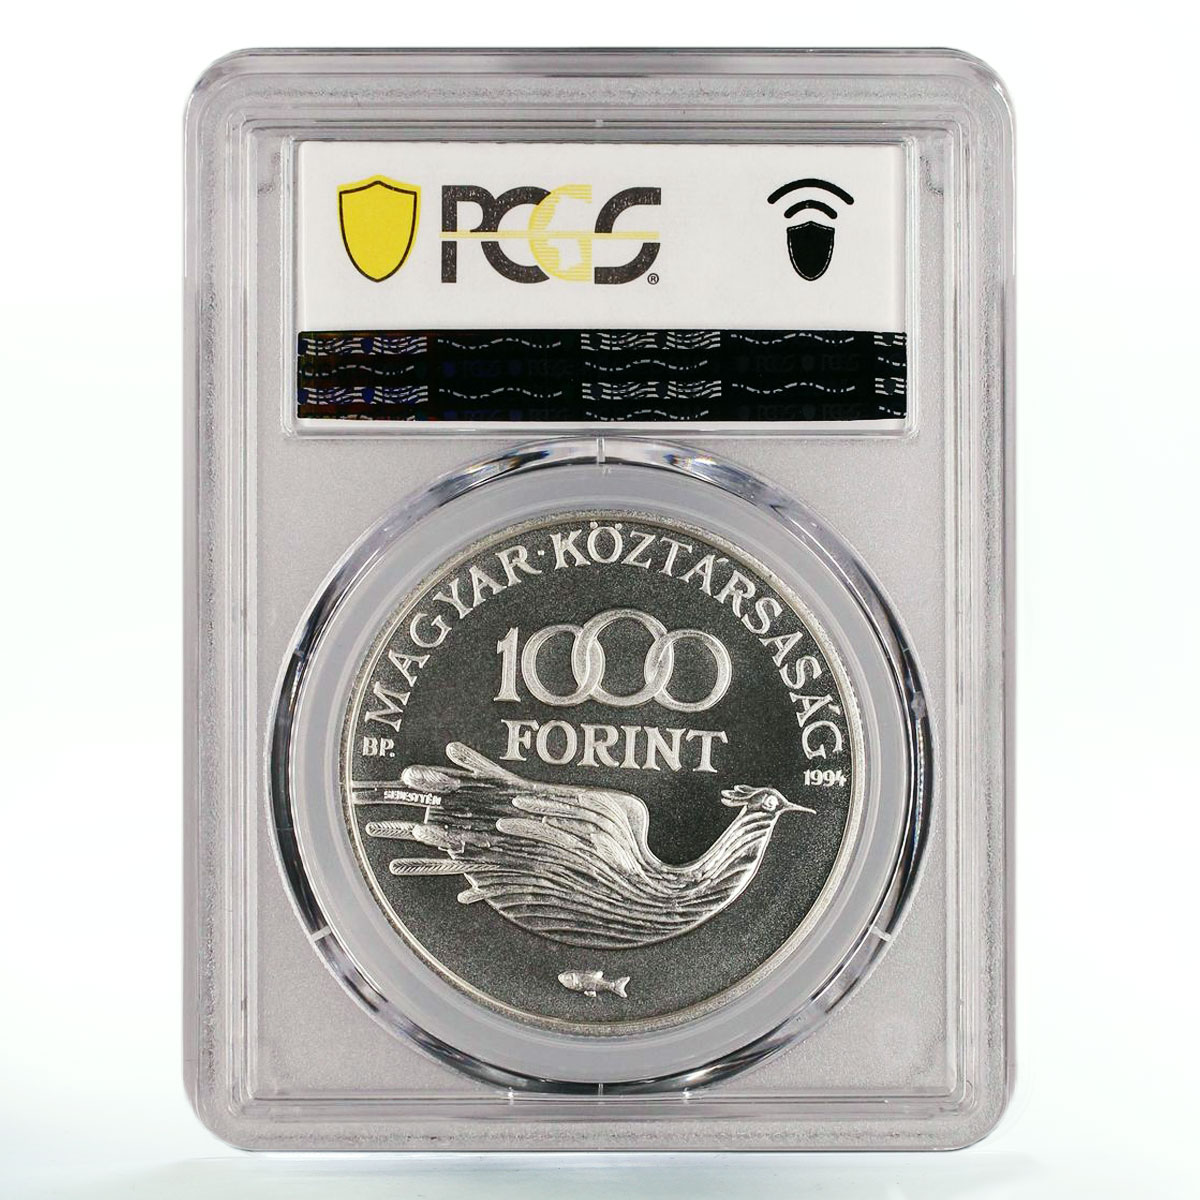 Hungary 1000 forint Protect Our World Fragile Bird Map MS69 PCGS Ag coin 1994